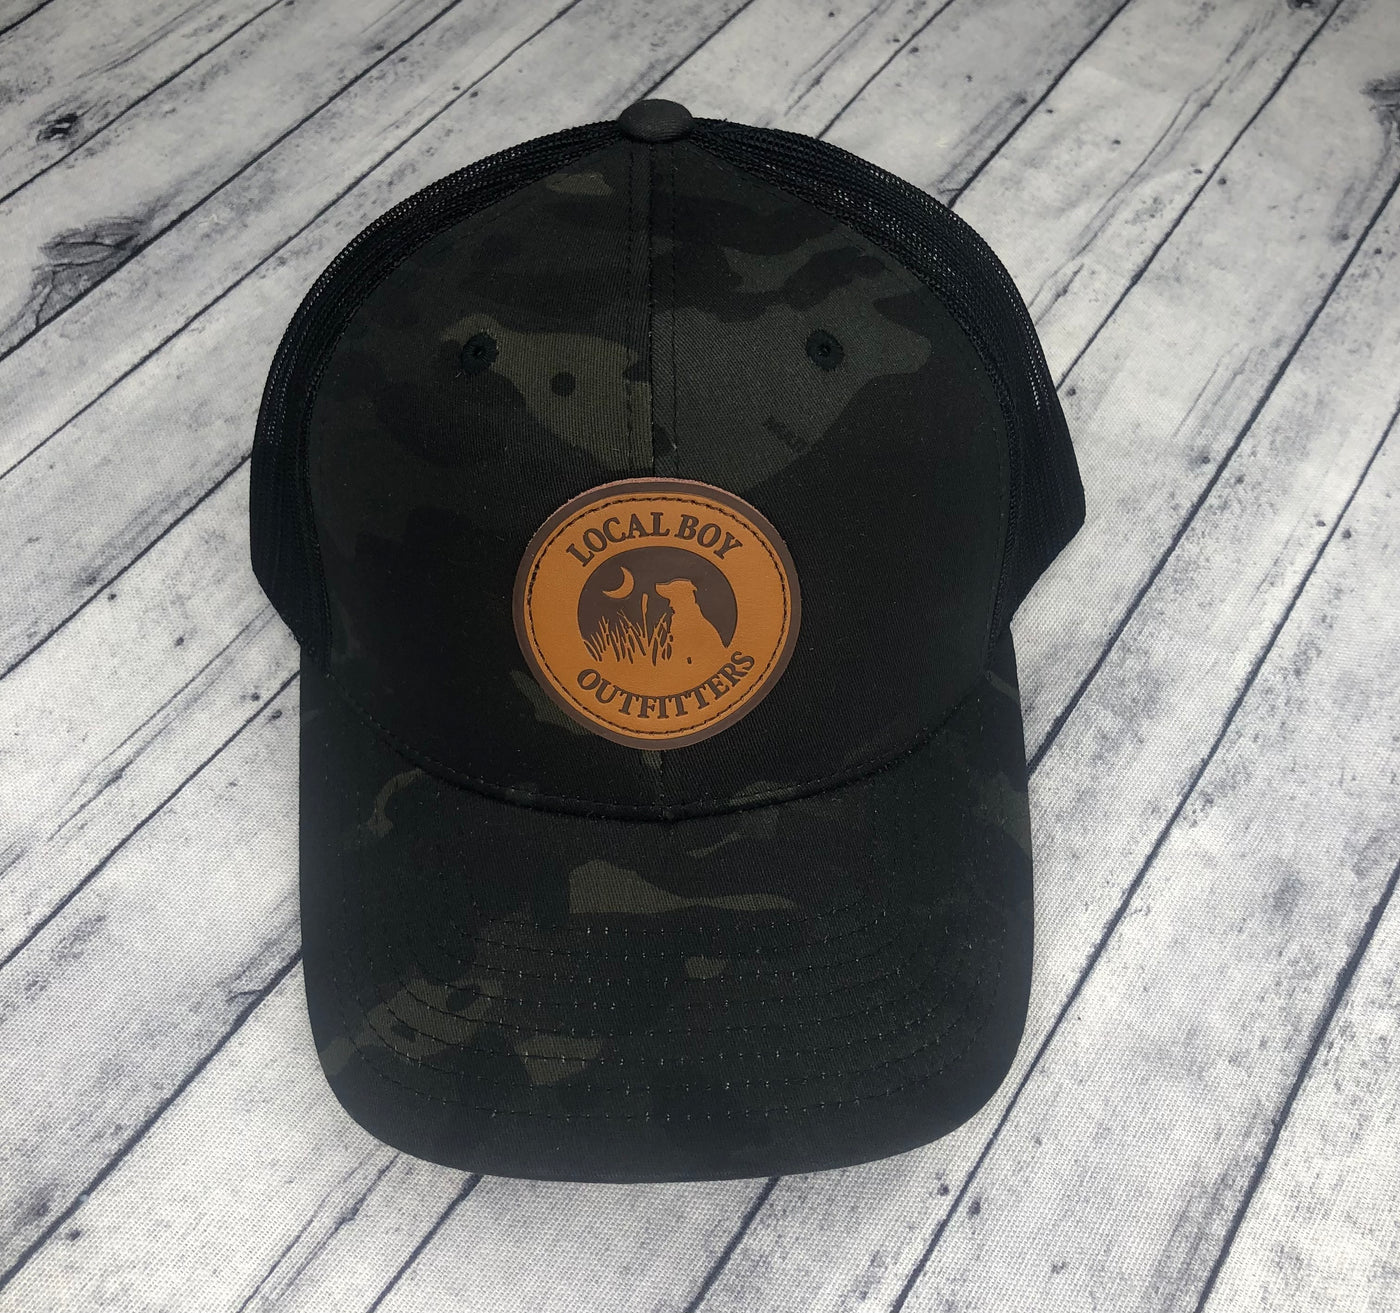 Local Boy Outfitters Grey Camo Patch Trucker Hat Black/Black